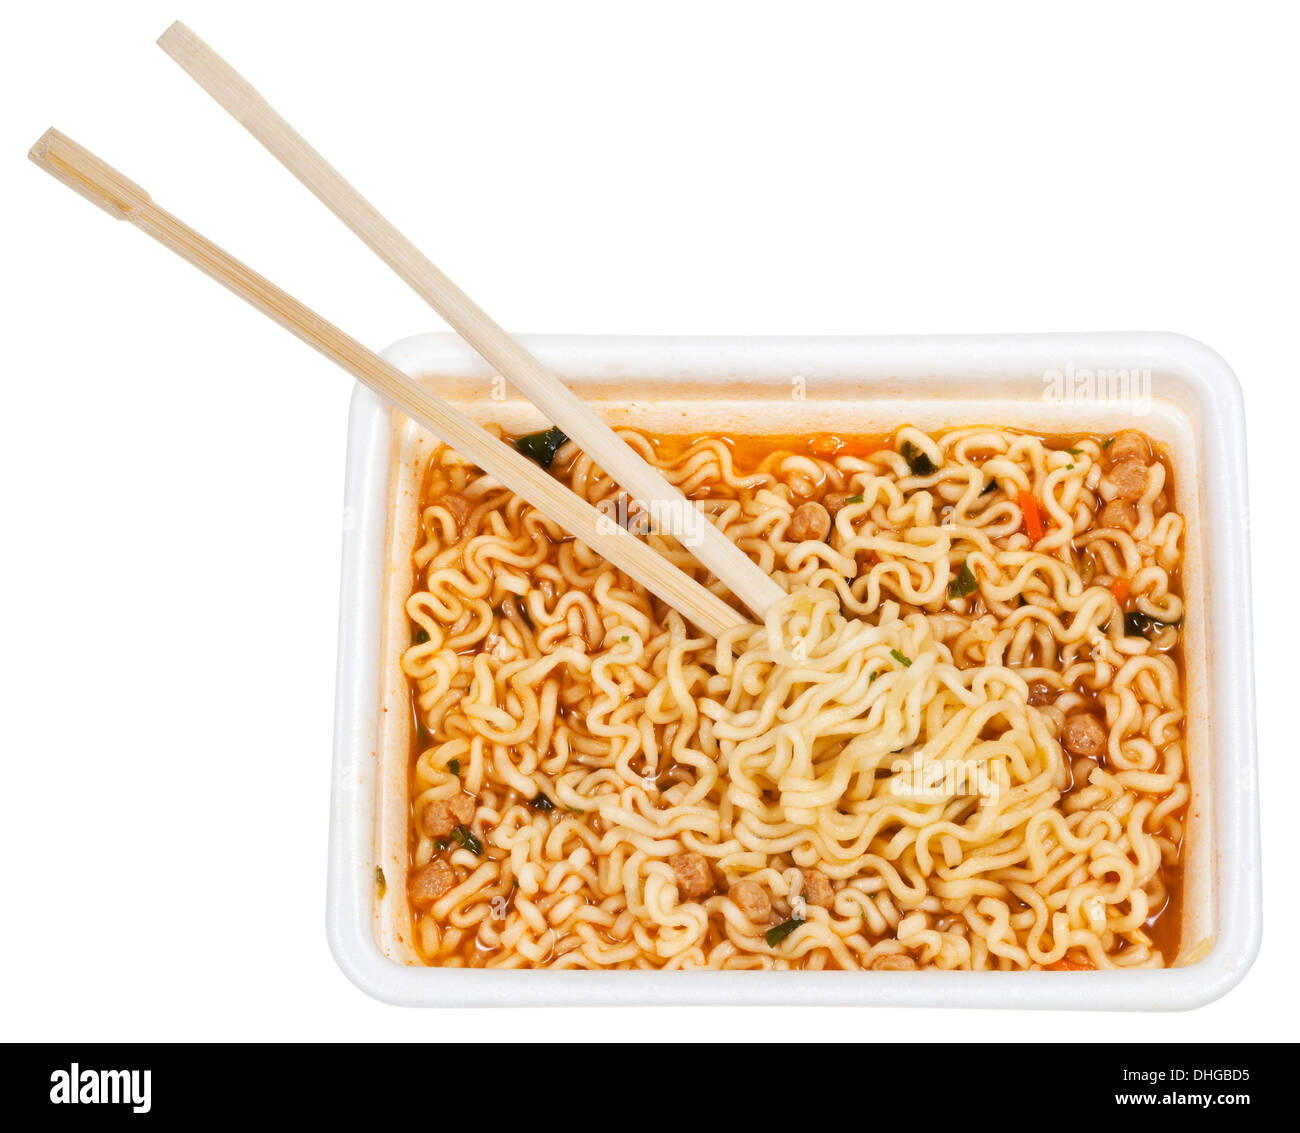 eating of prepared instant noodles by wooden chopsticks from foam cap isolated on white background Stock Photo